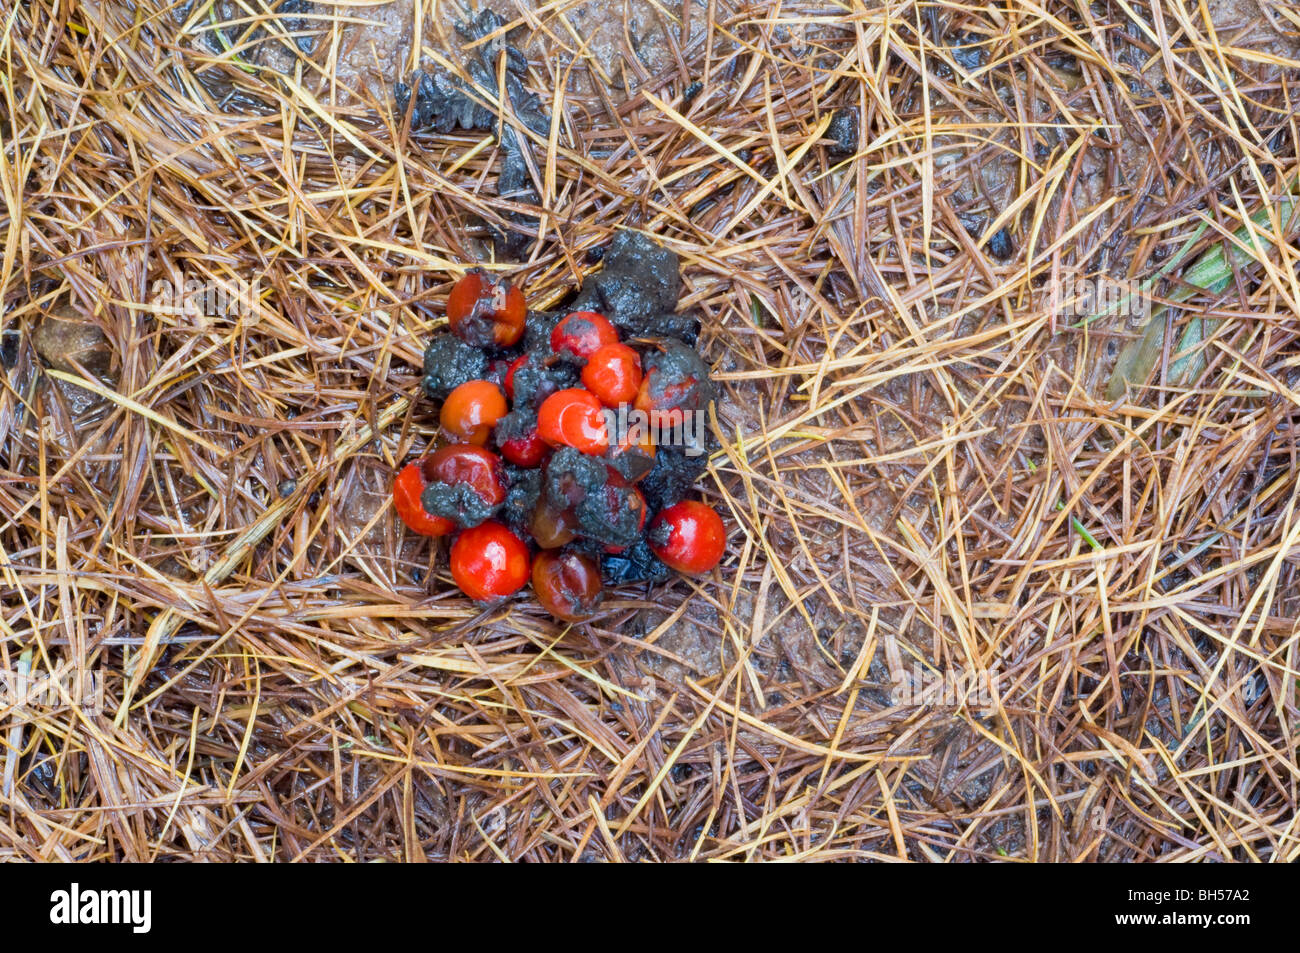 Pine Marten, Martes martes, droppings containing red berries of Cowberry Stock Photo